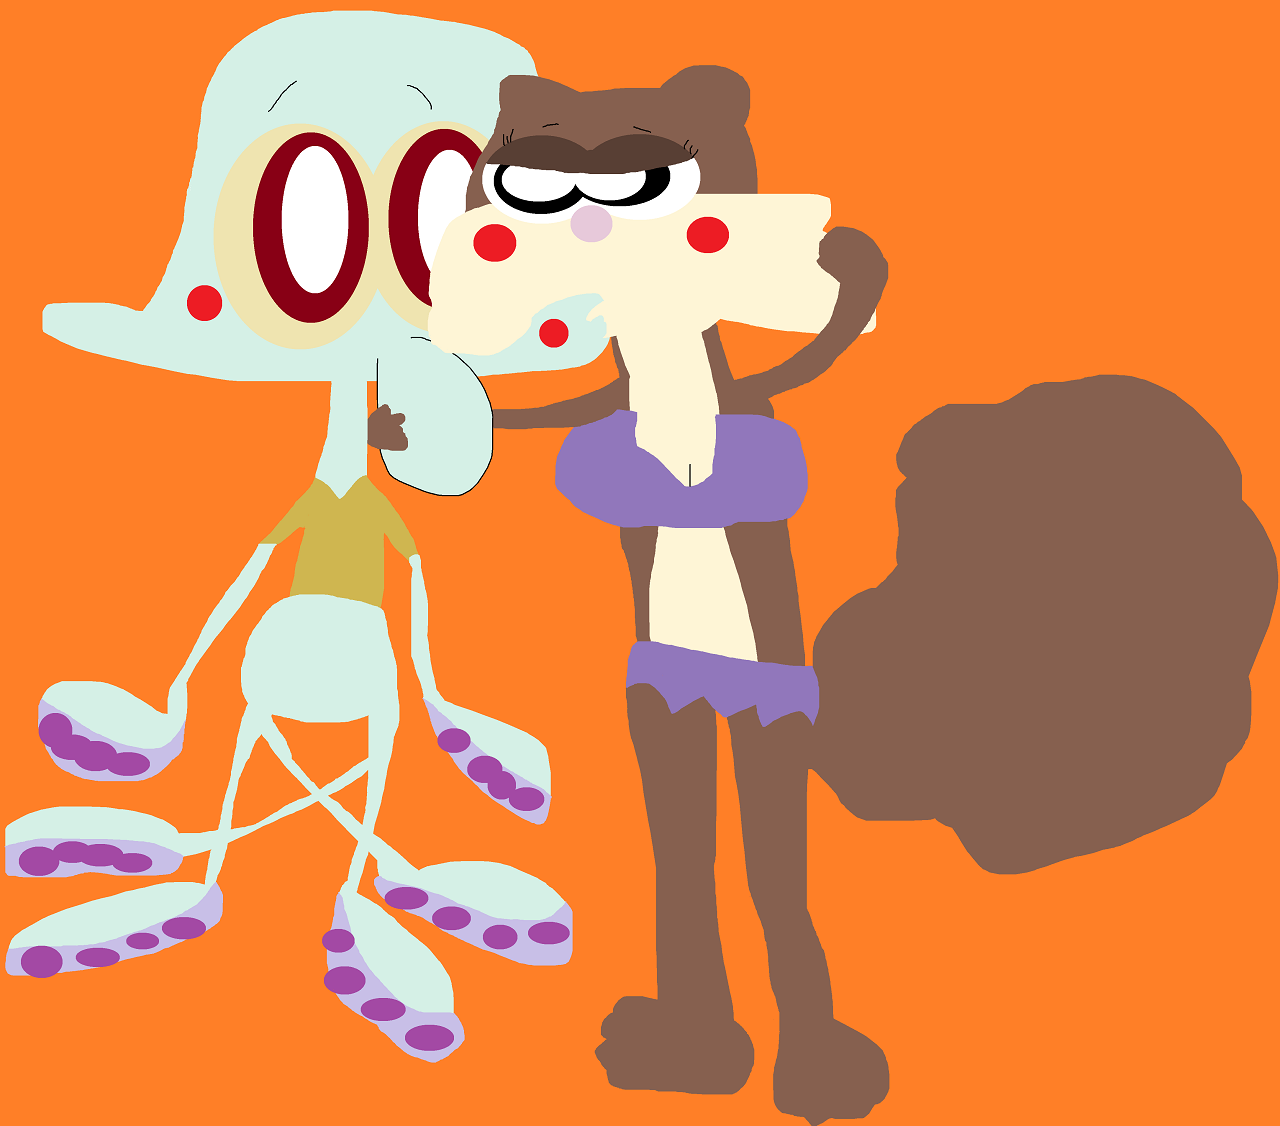 Just Another Sandy Kissing Squidward Again by Falconlobo